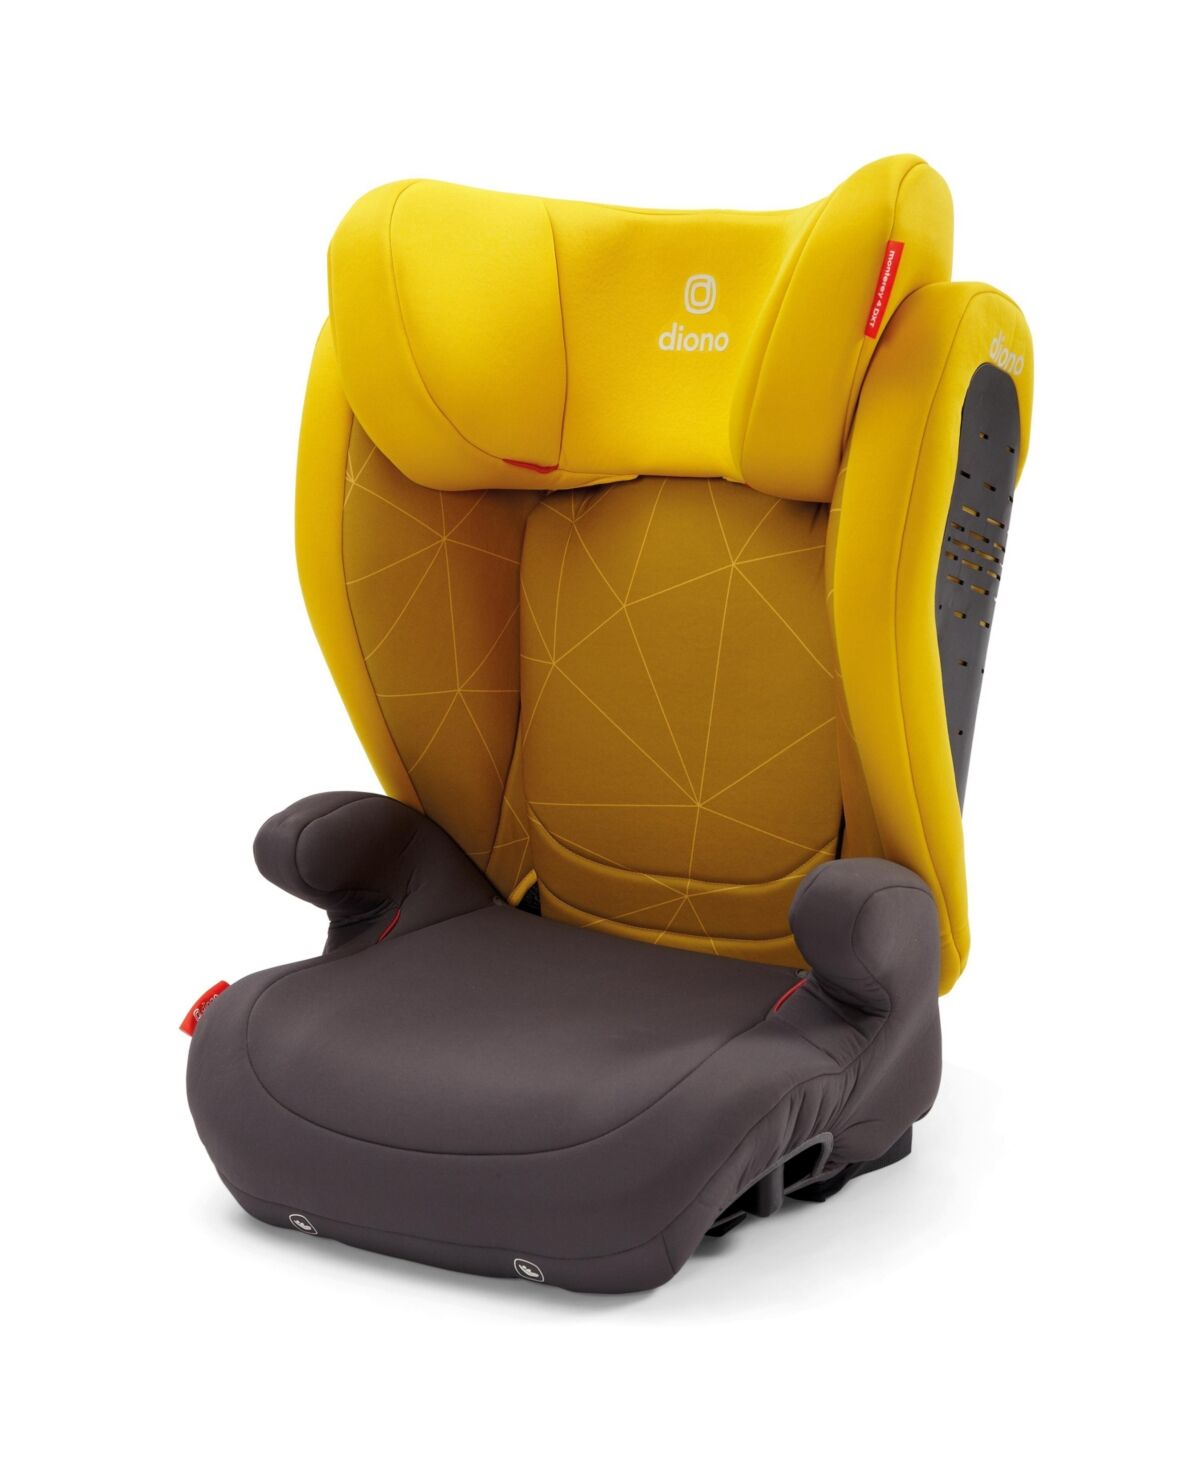 Diono Monterey 4DXT Latch 2-in-1 Booster Car Seat - Yellow